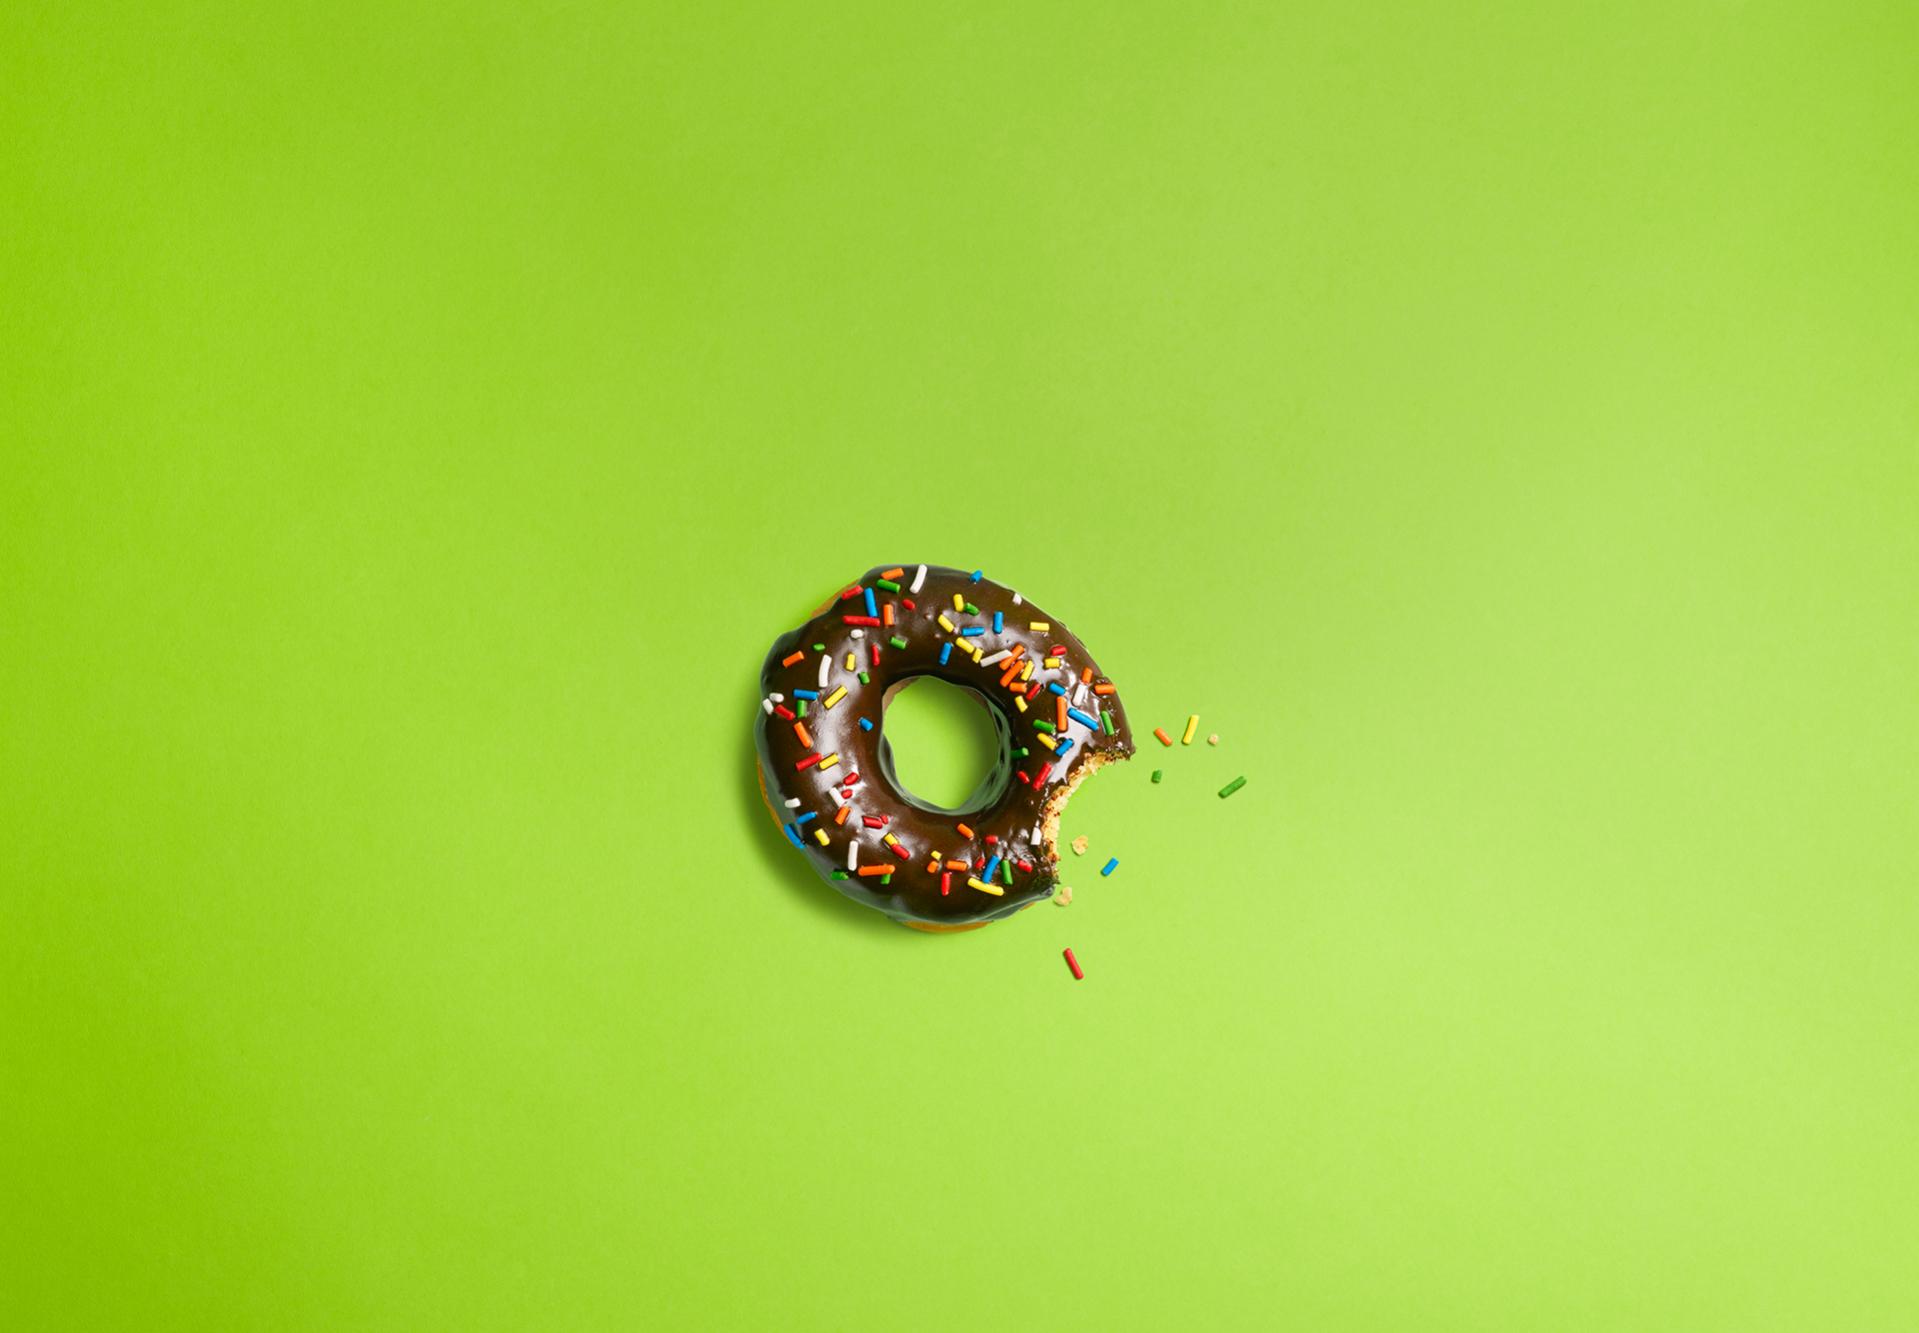 Android Donut - Donut Wallpaper Android - HD Wallpaper 